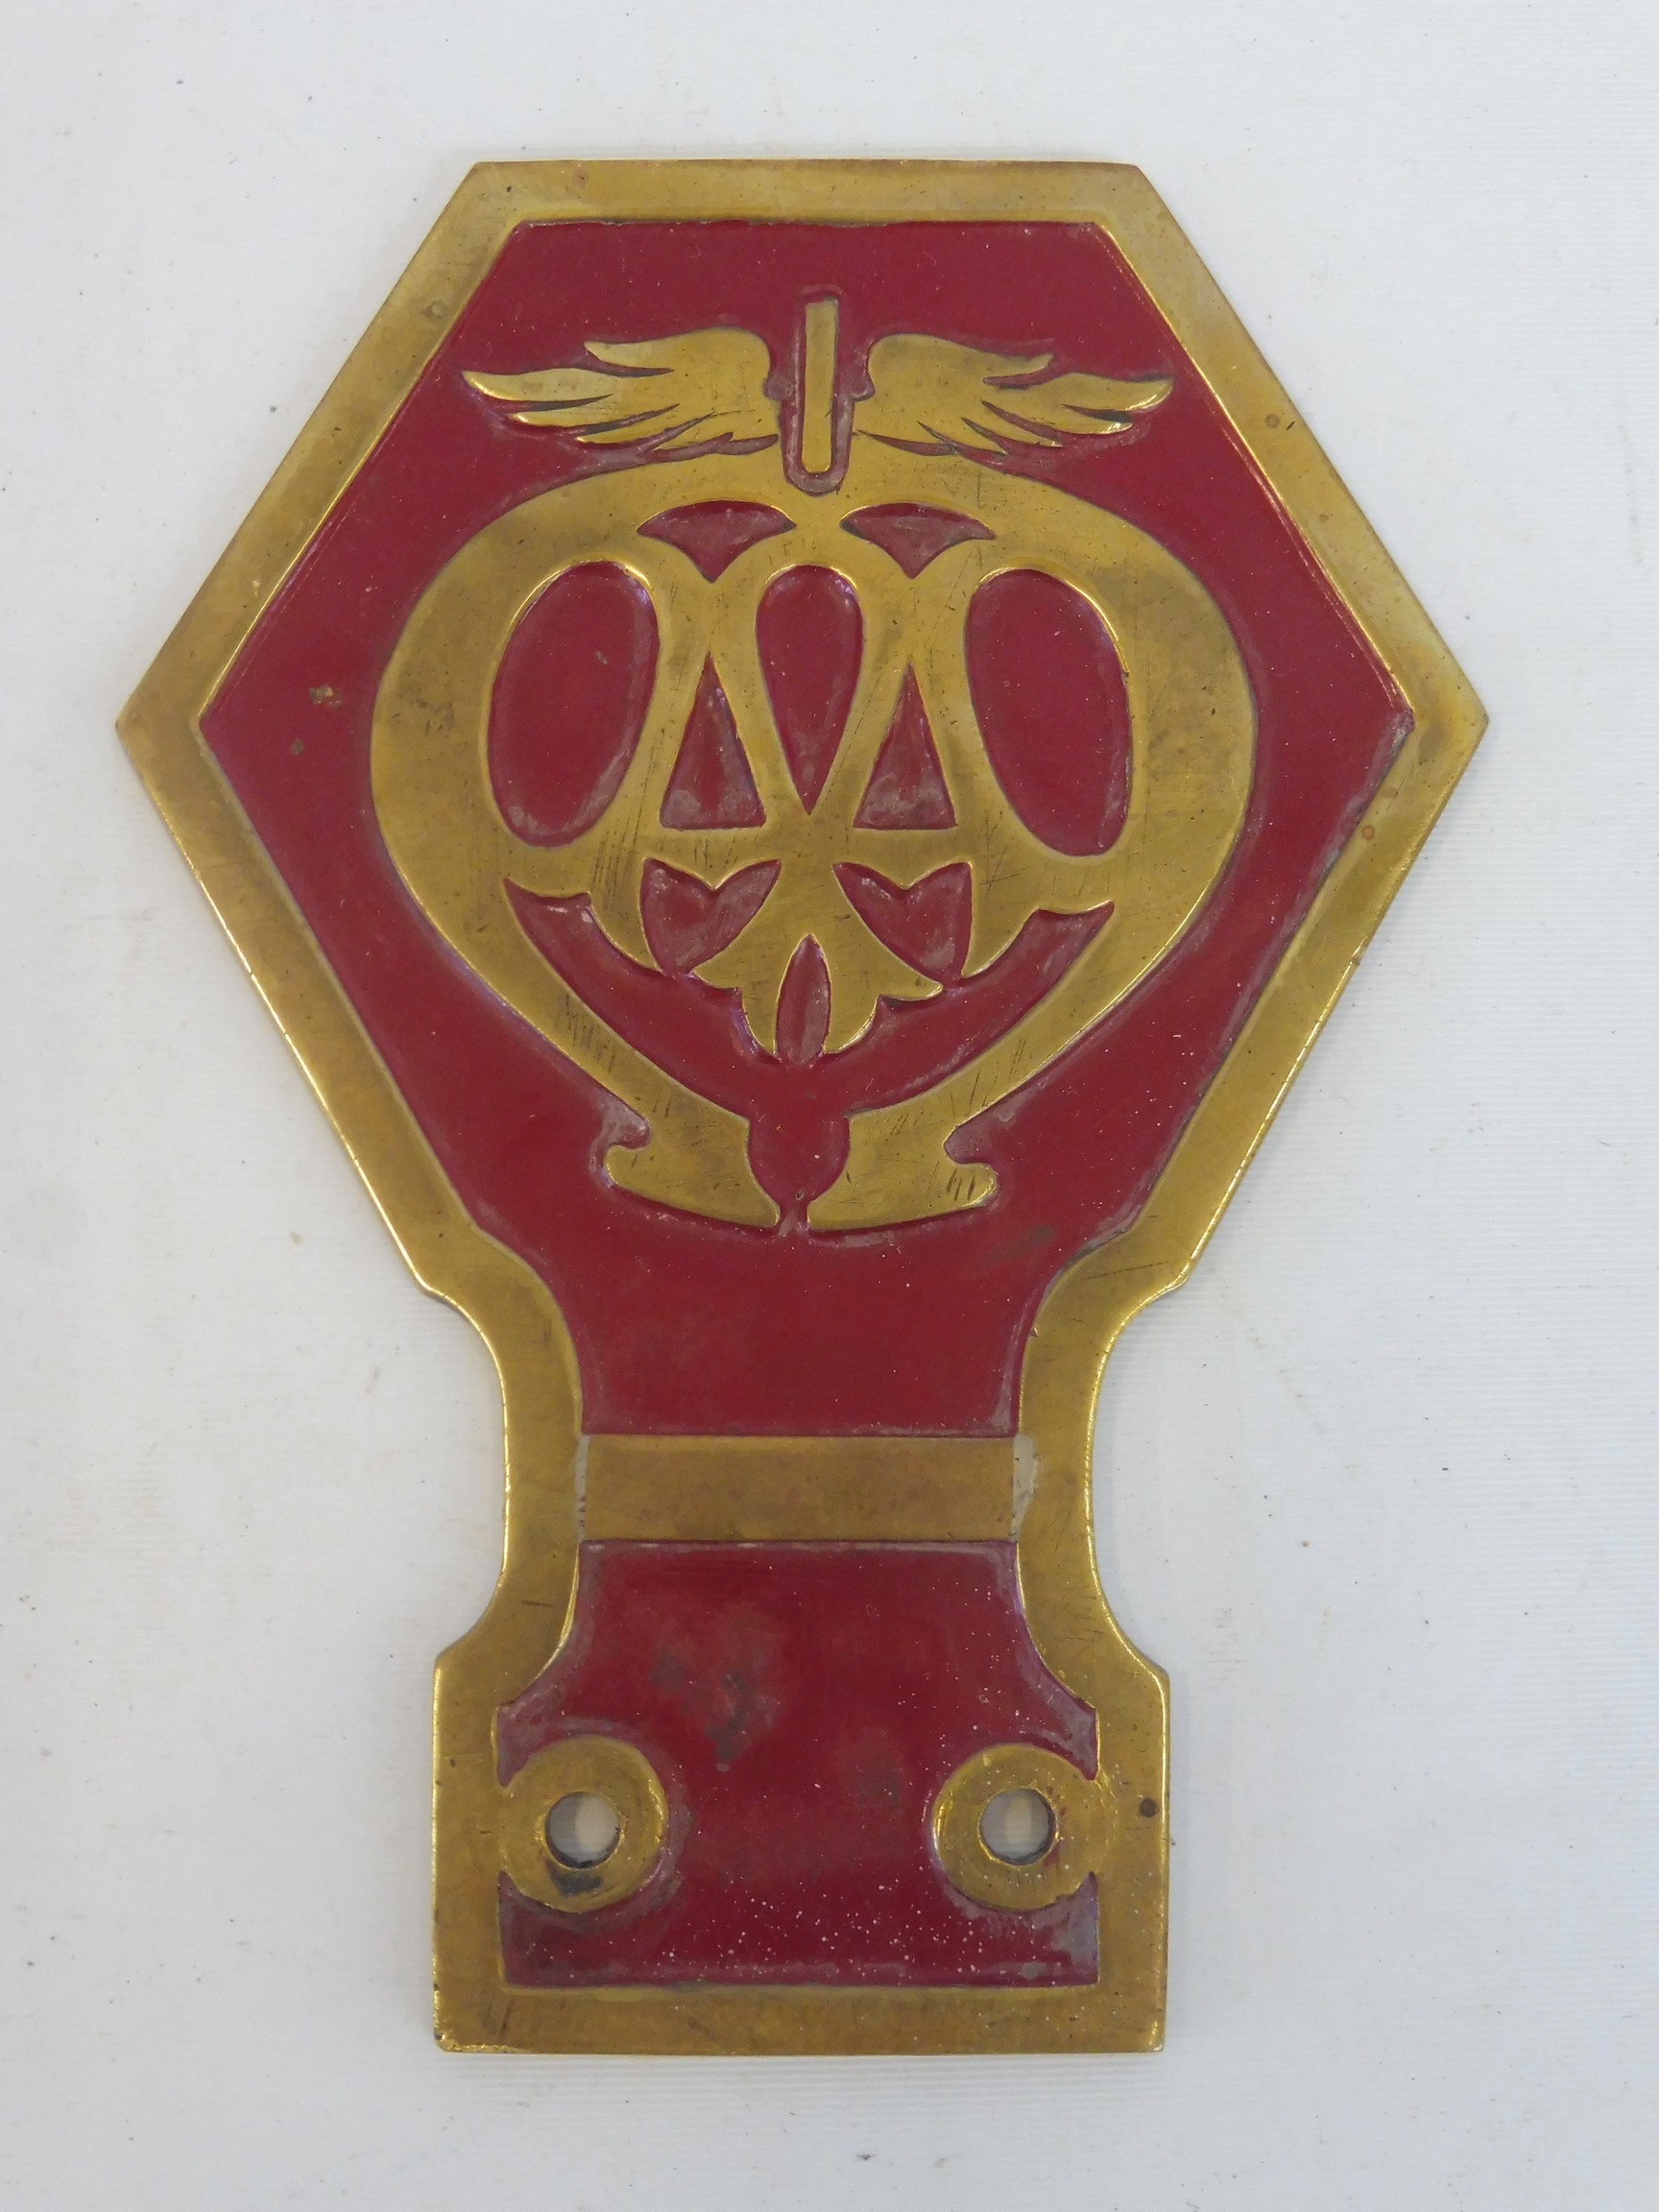 An AA brass commercial badge, may be a prototype as bar added.